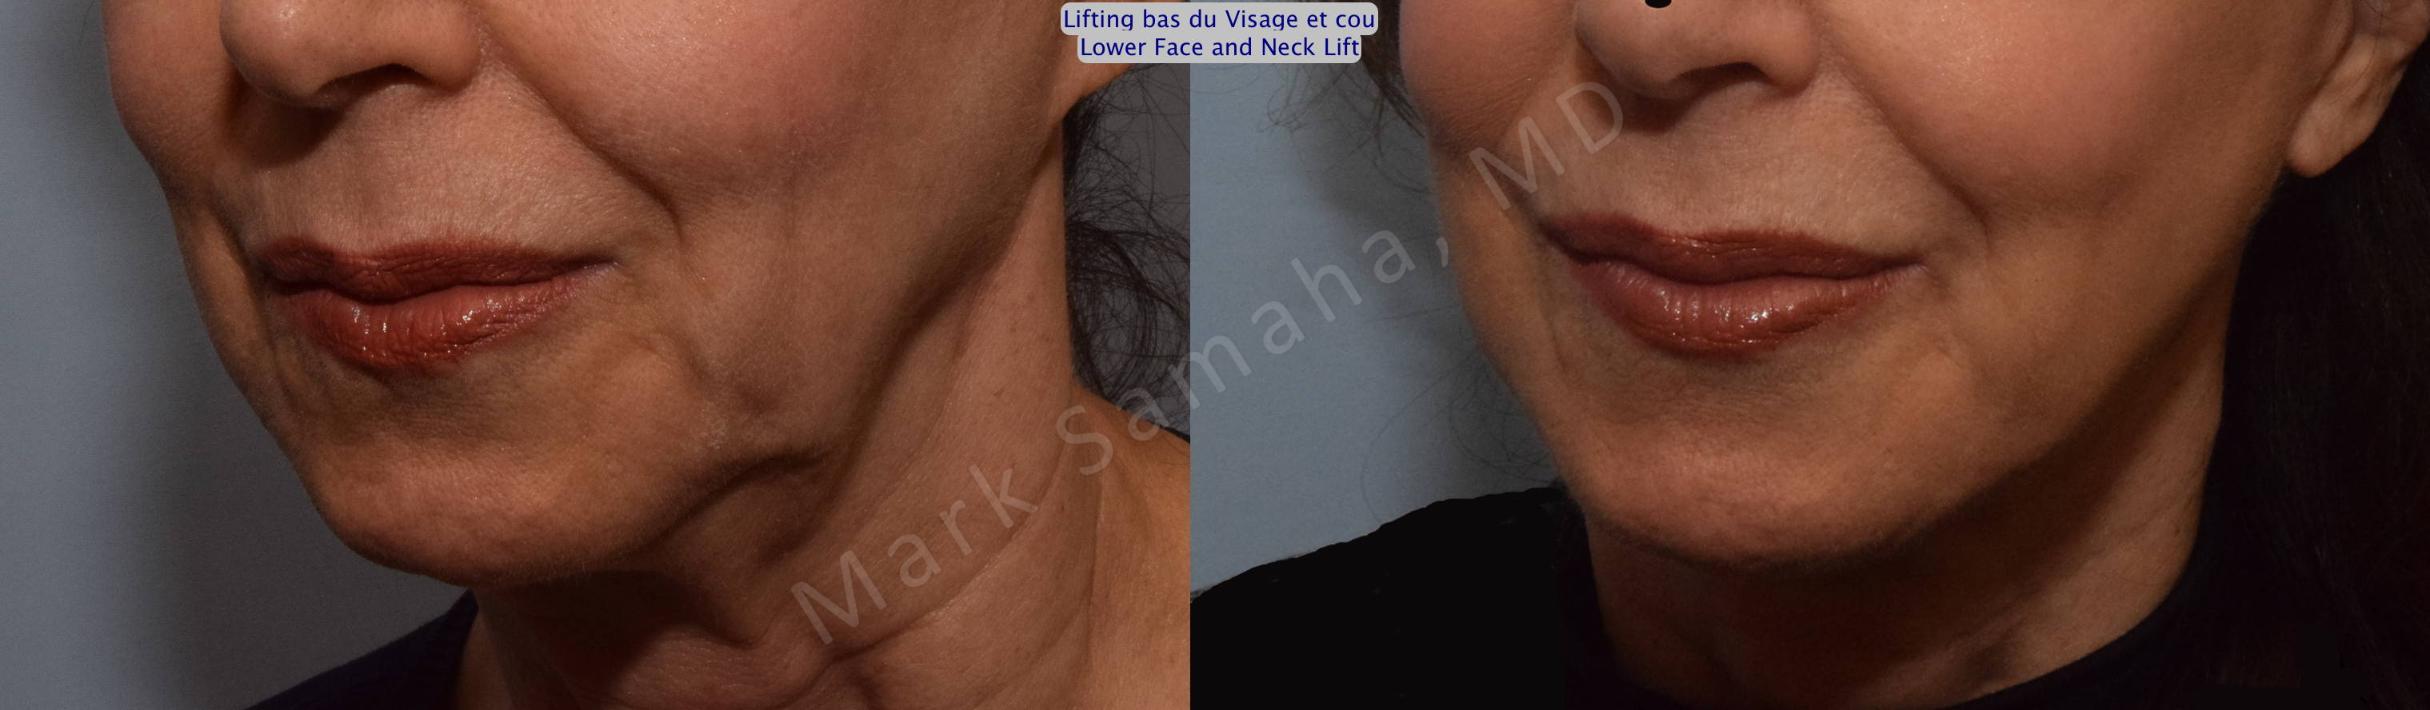 Before & After Facelift / Necklift - Lifting du visage / Cou Case 101 View #5 View in Mount Royal, QC